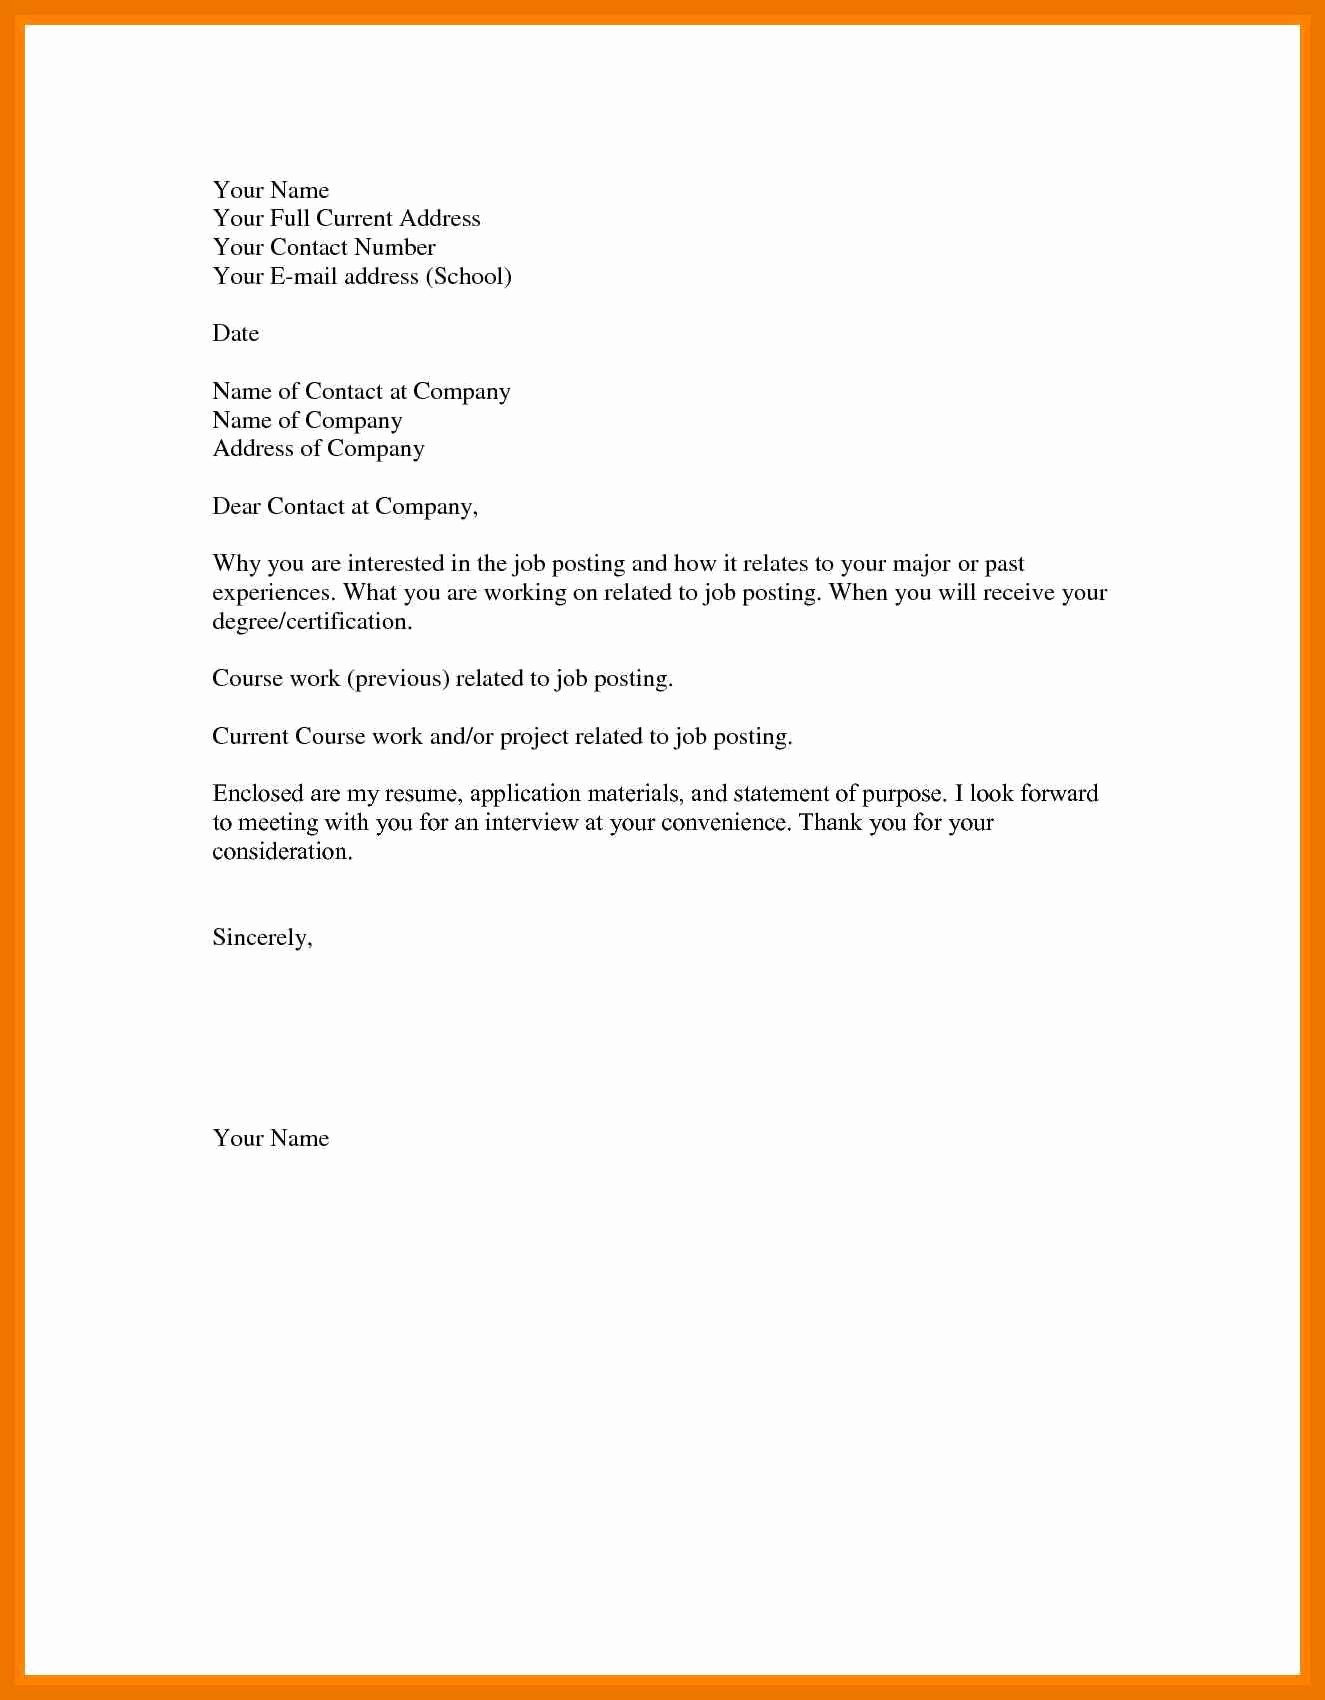 Sample Of Simple Cover Letter Awesome 5 6 Short and Simple Cover Letter